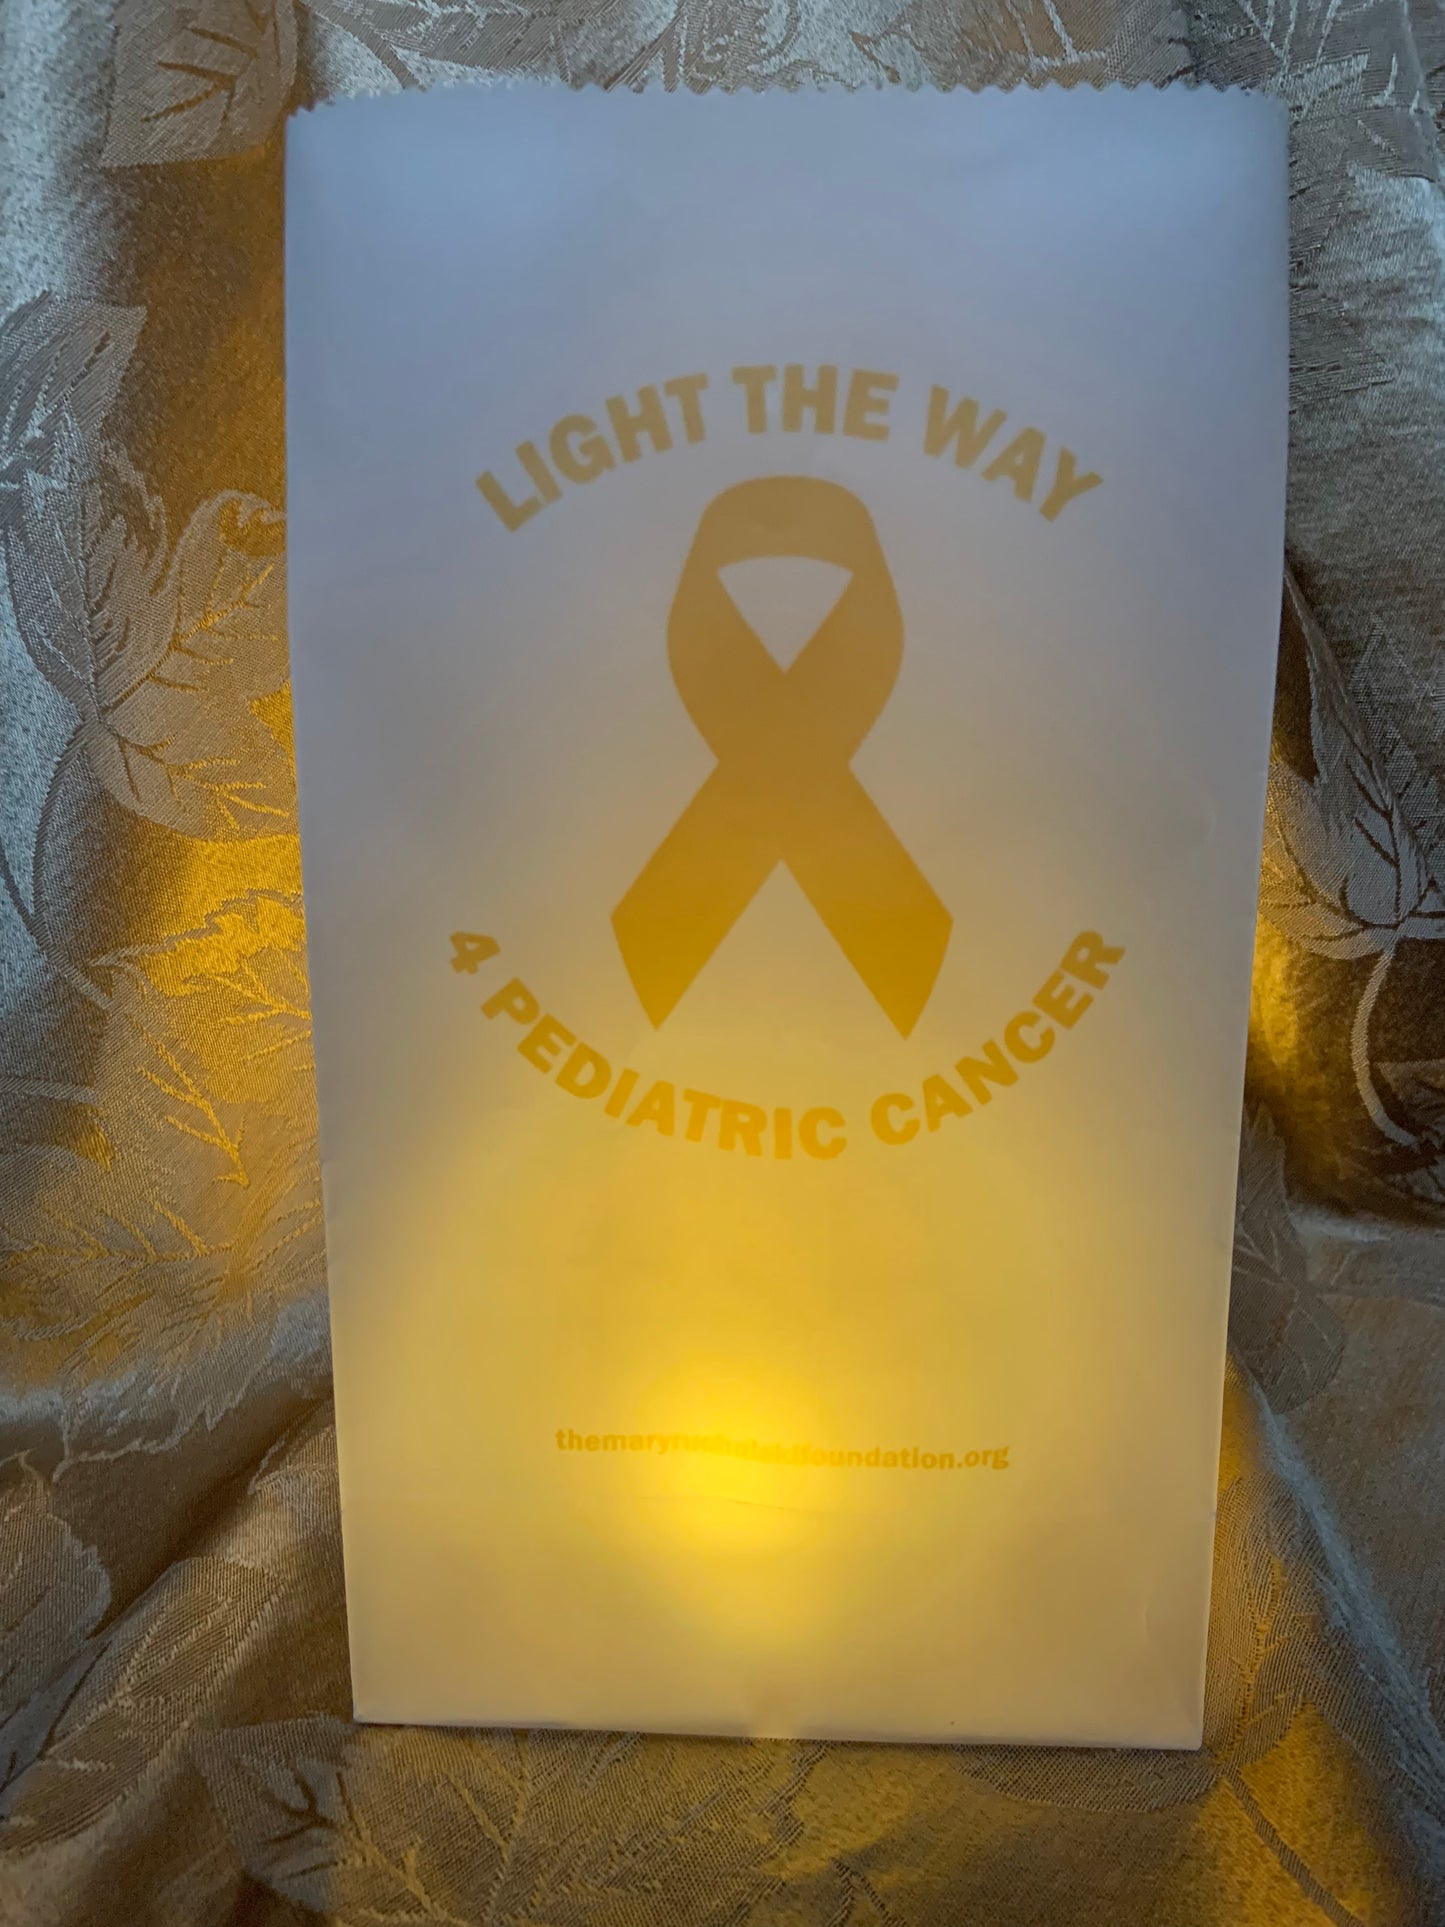 Lanterns - Light The Way 4 Pediatric Cancer Lantern - RESERVE & PAY IN STORE